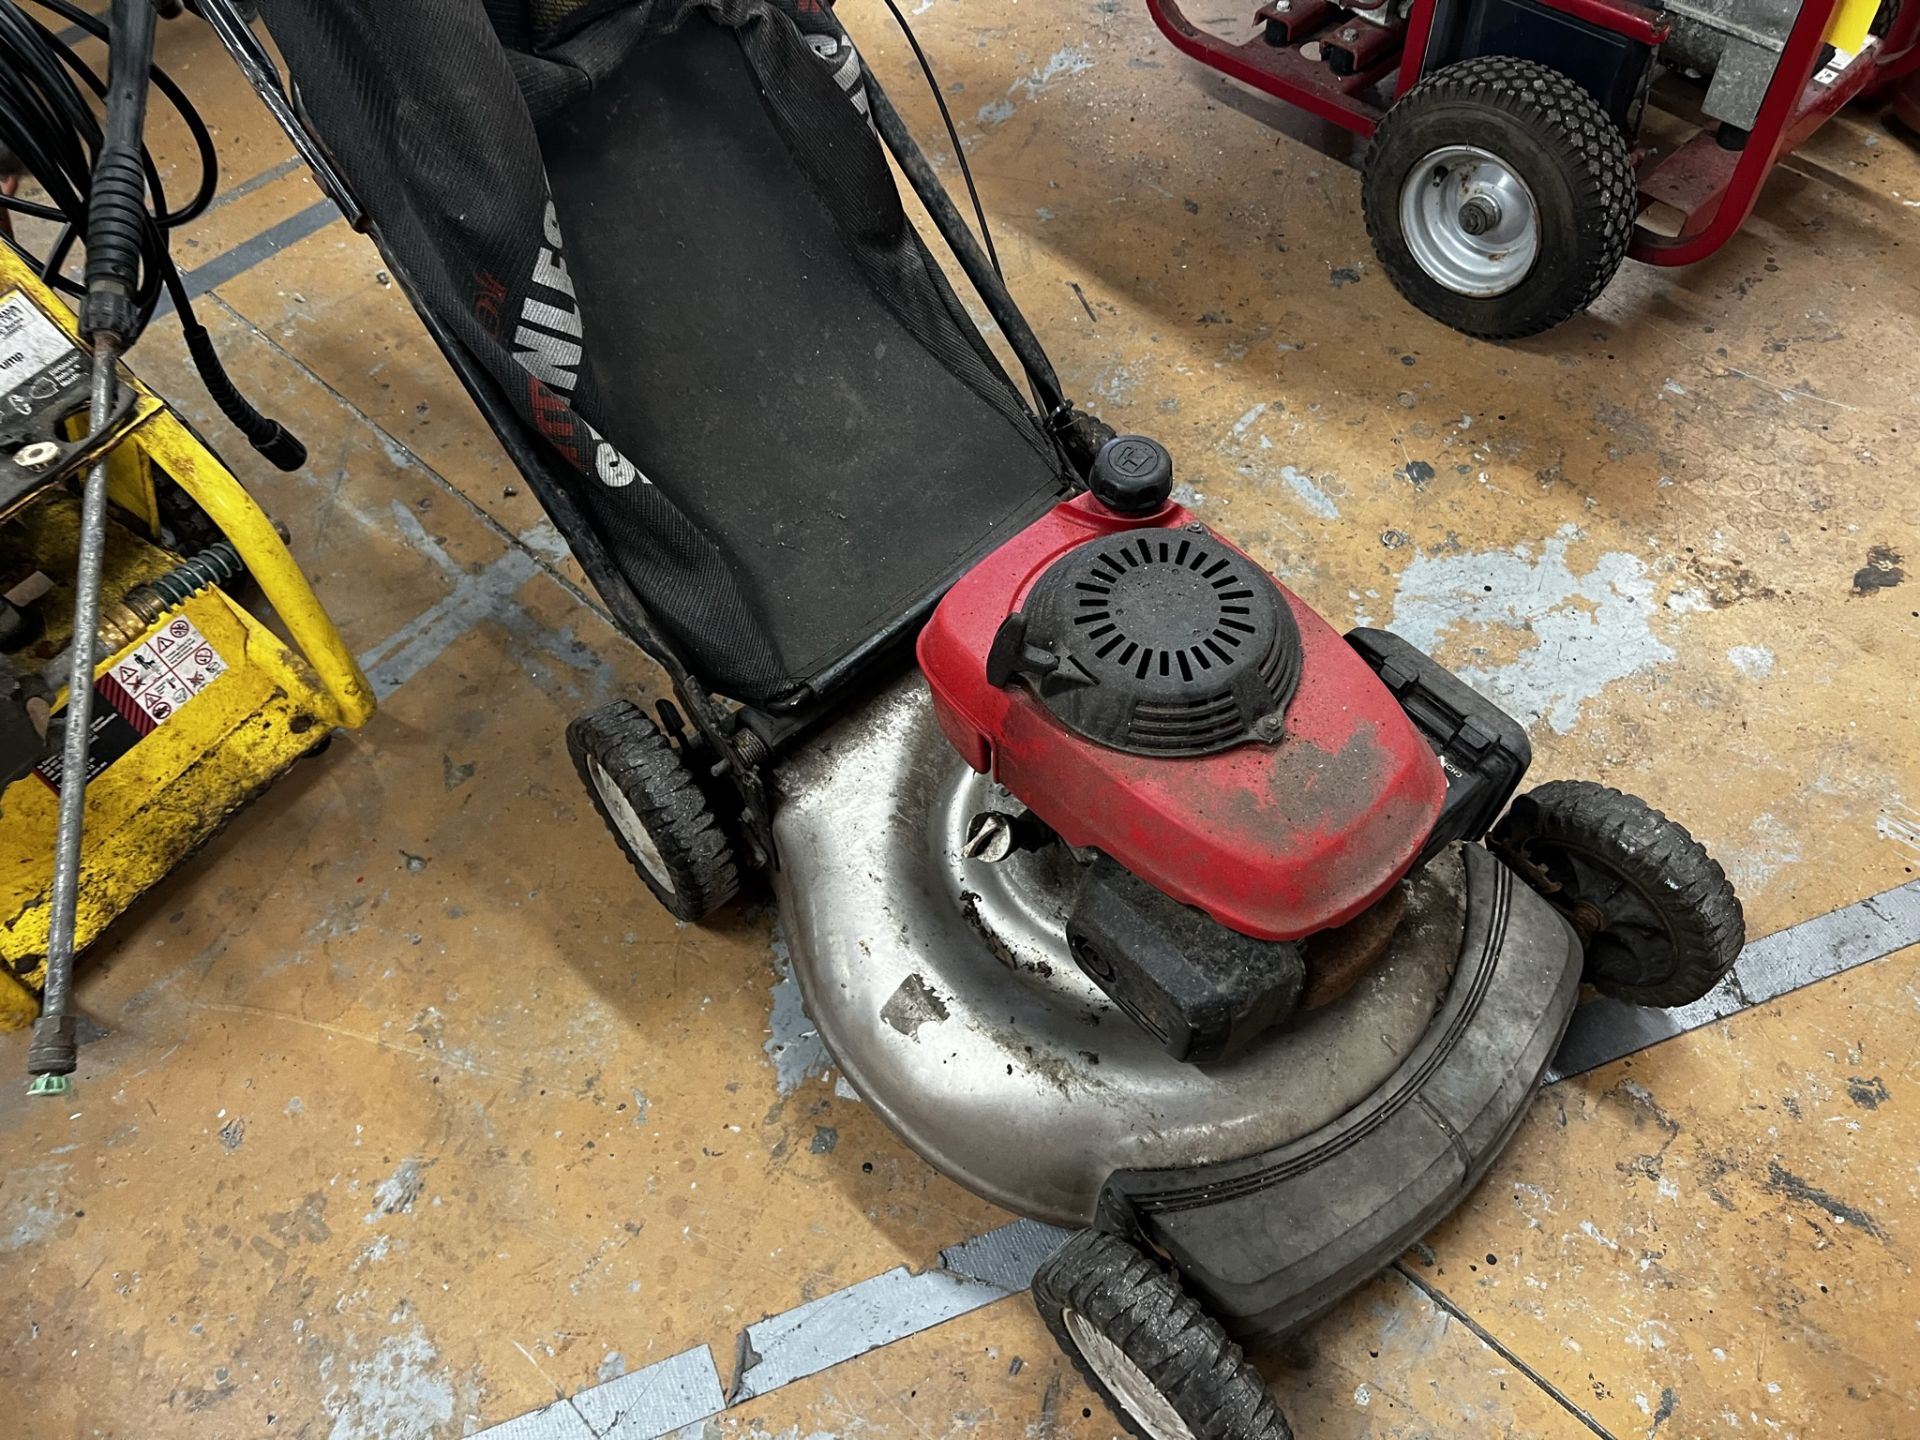 GAS POWERED LAWN MOWER WITH BAG (LOCATED IN WEST PALM BEACH, FL)